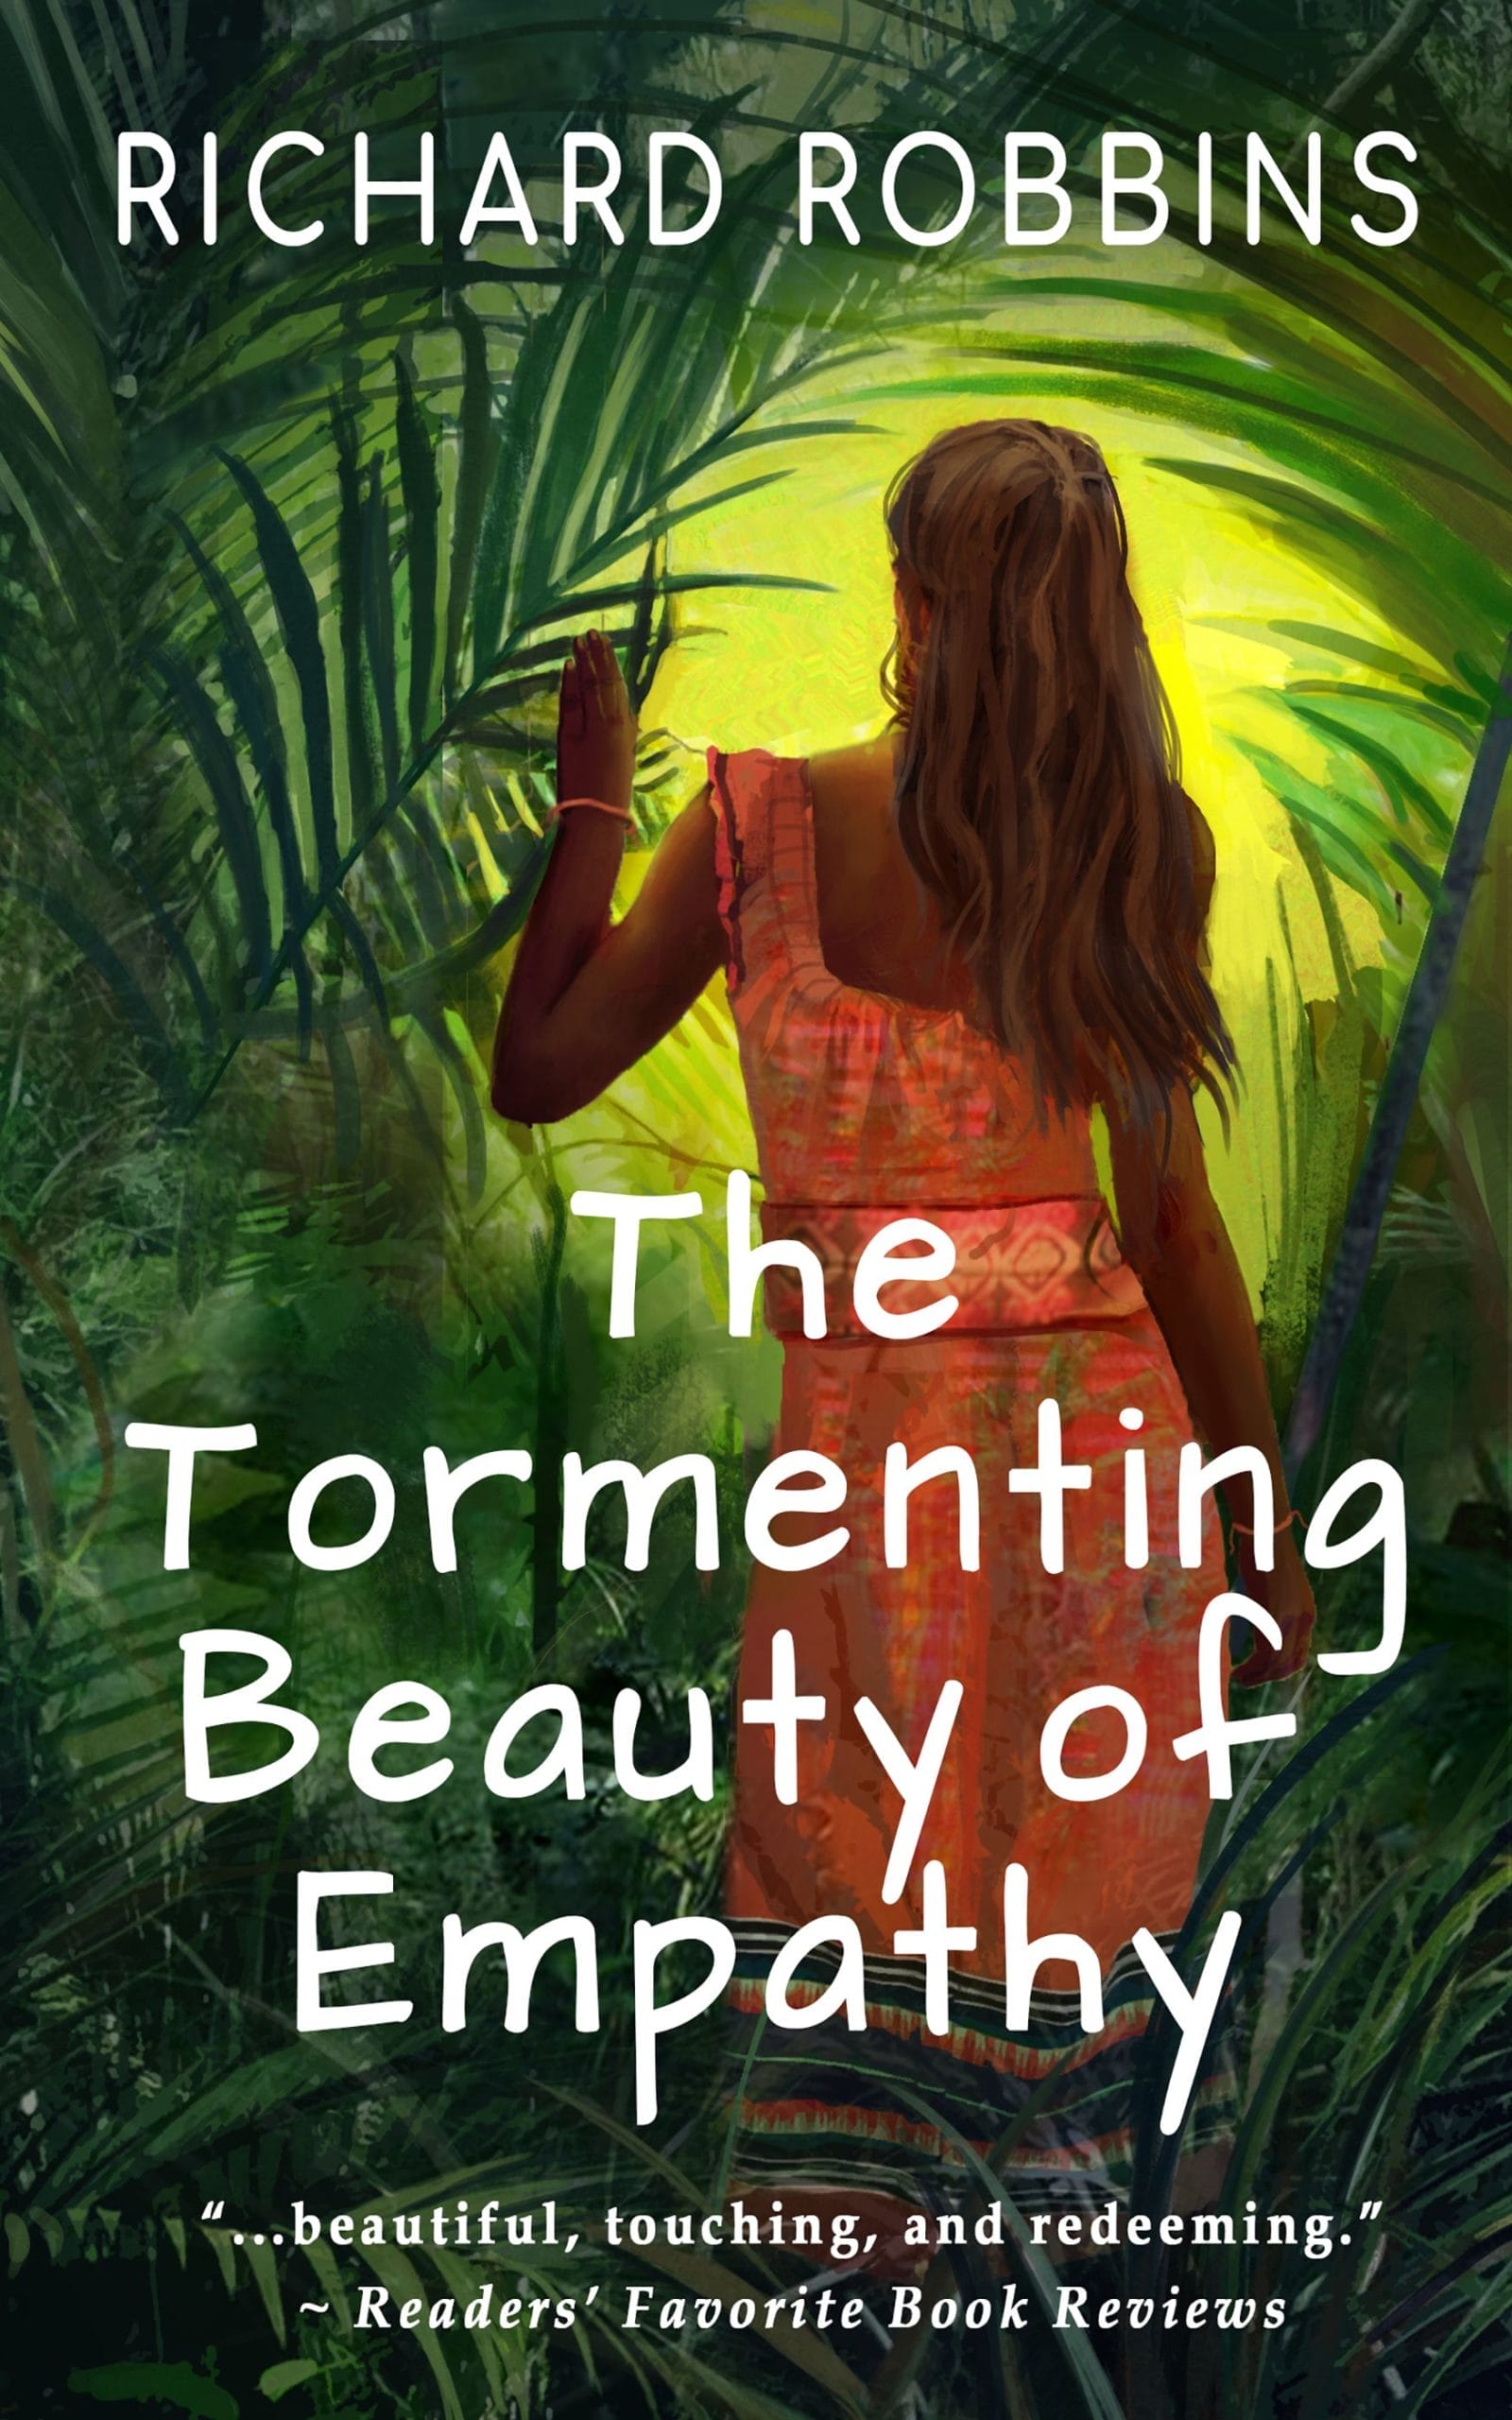 Book titled The Tormenting Beauty of Empathy